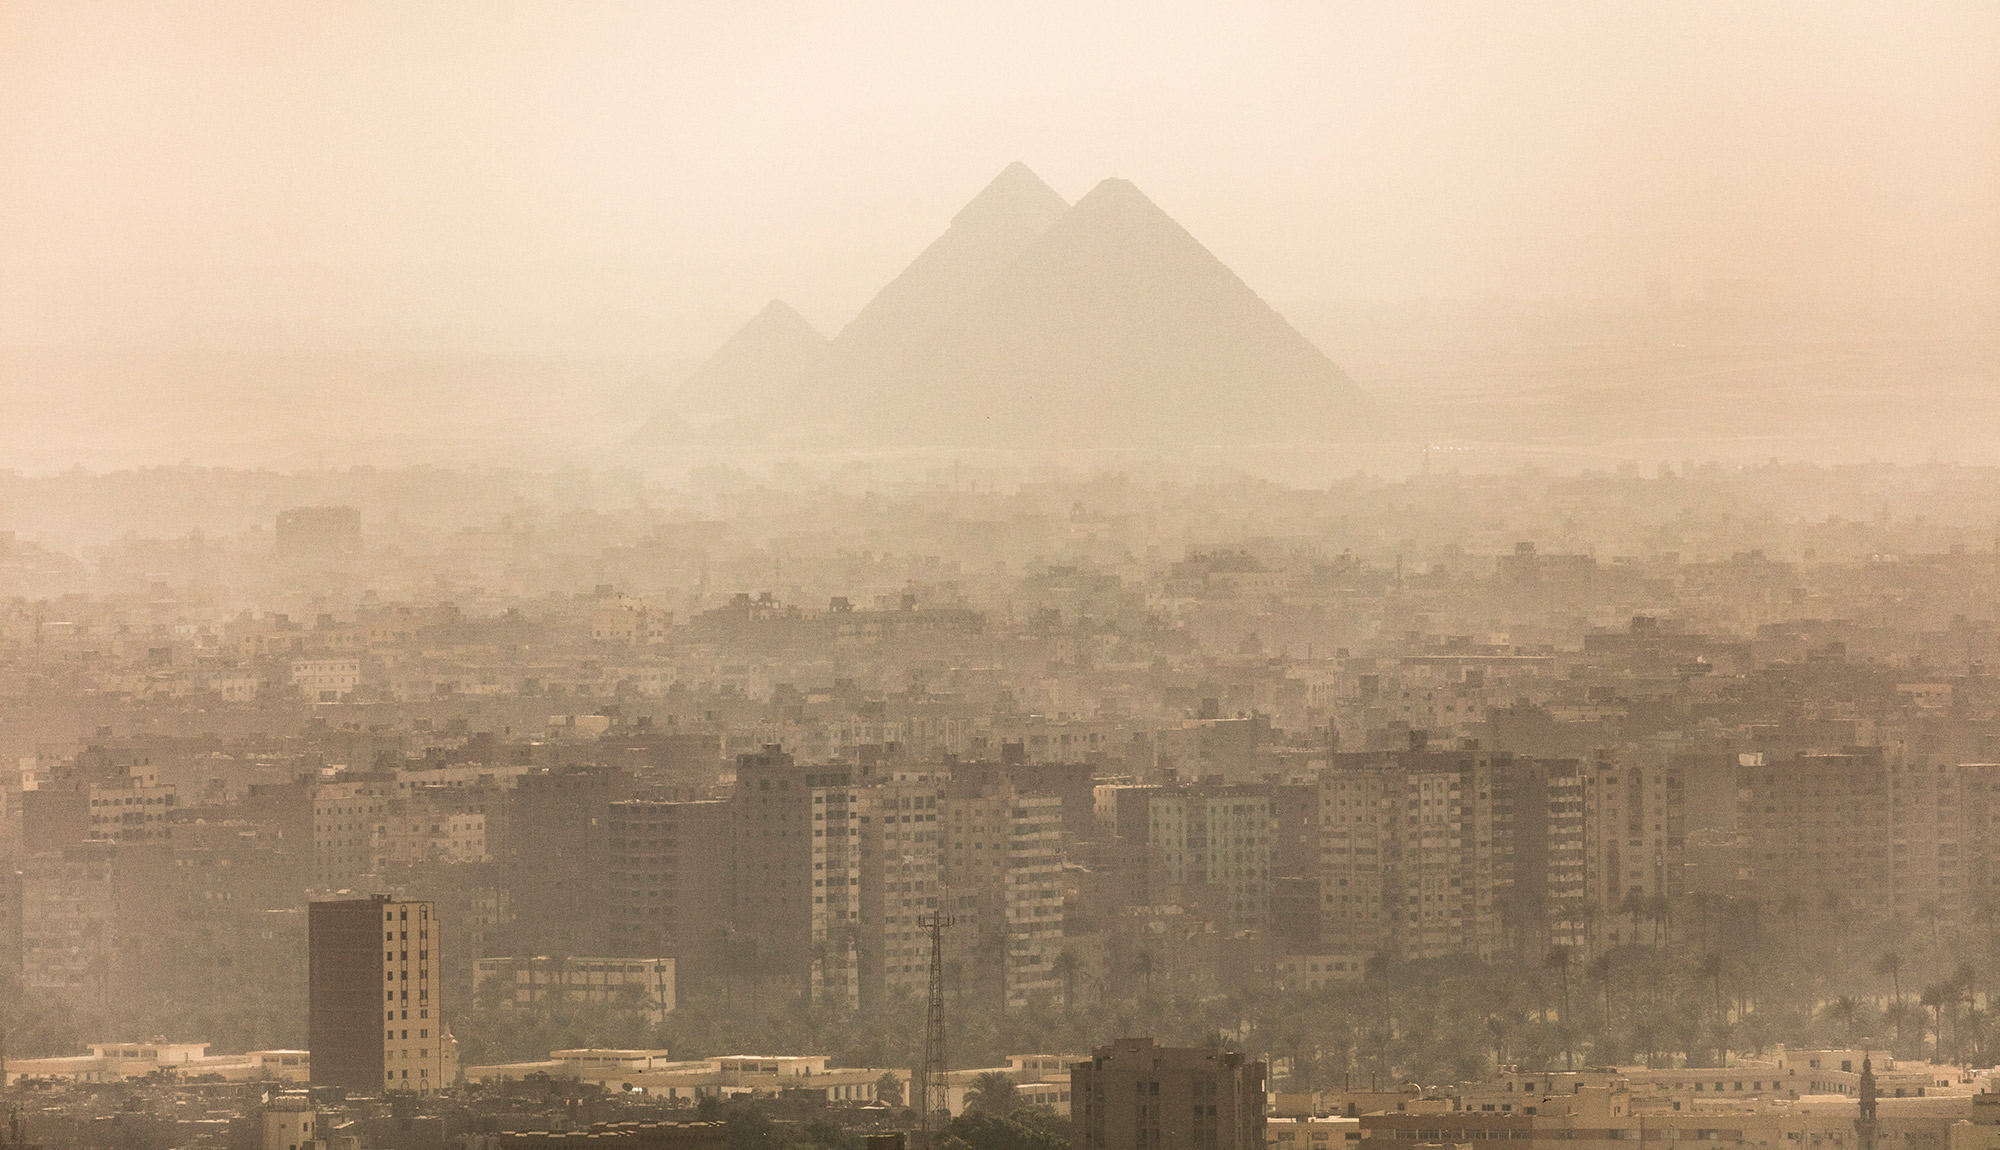 The Giza Pyramids rise above the buildings of Giza on September